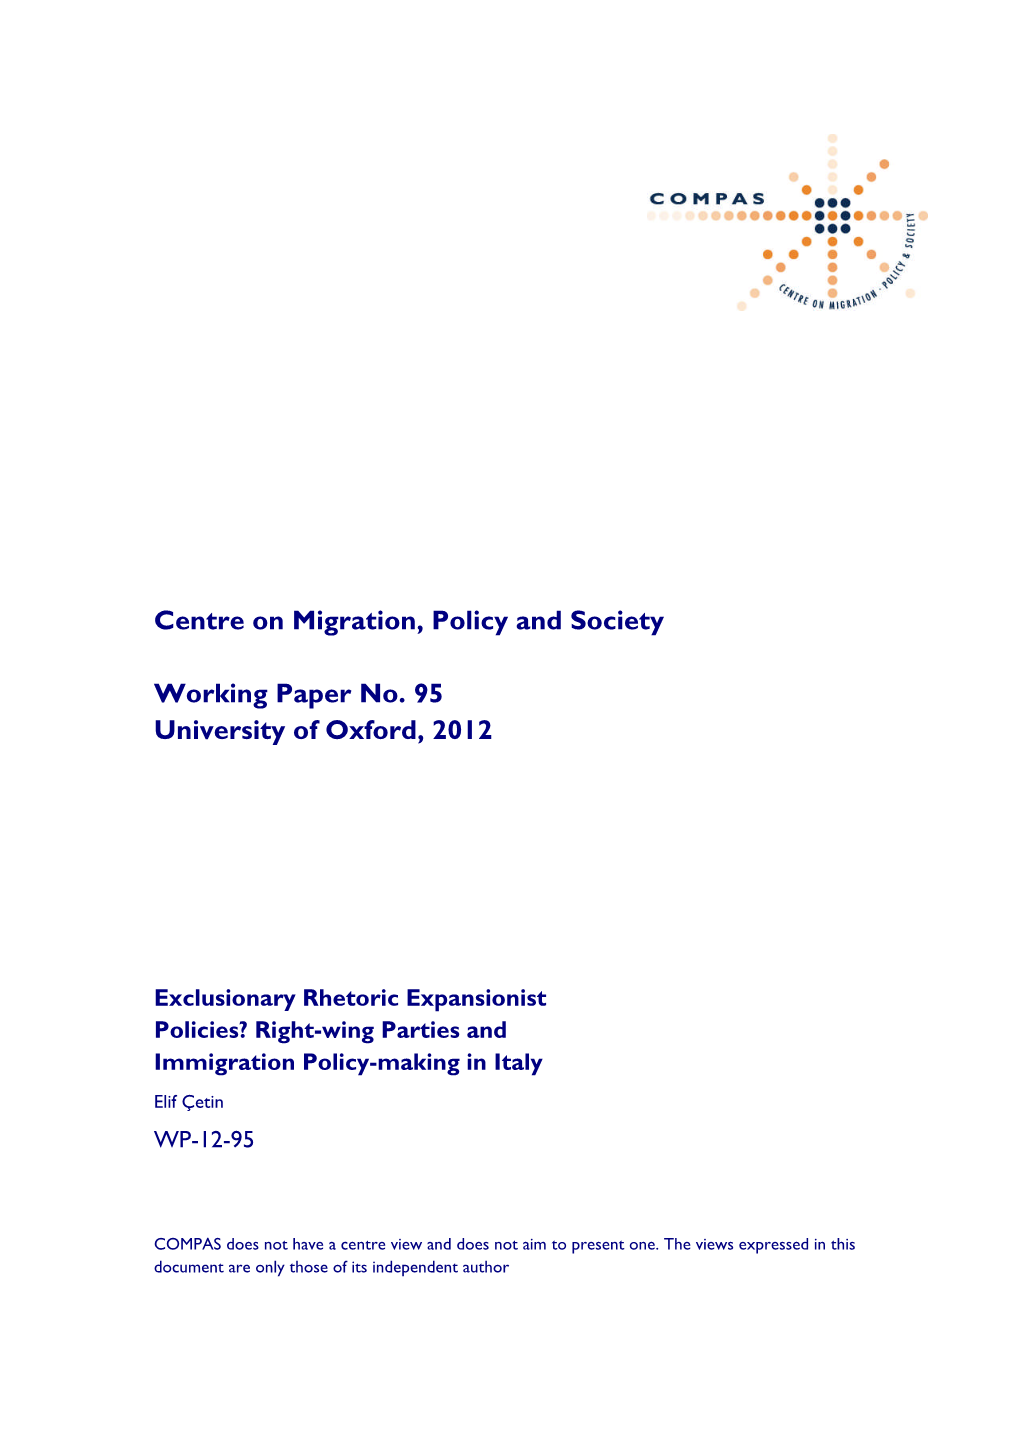 Centre on Migration, Policy and Society Working Paper No. 95